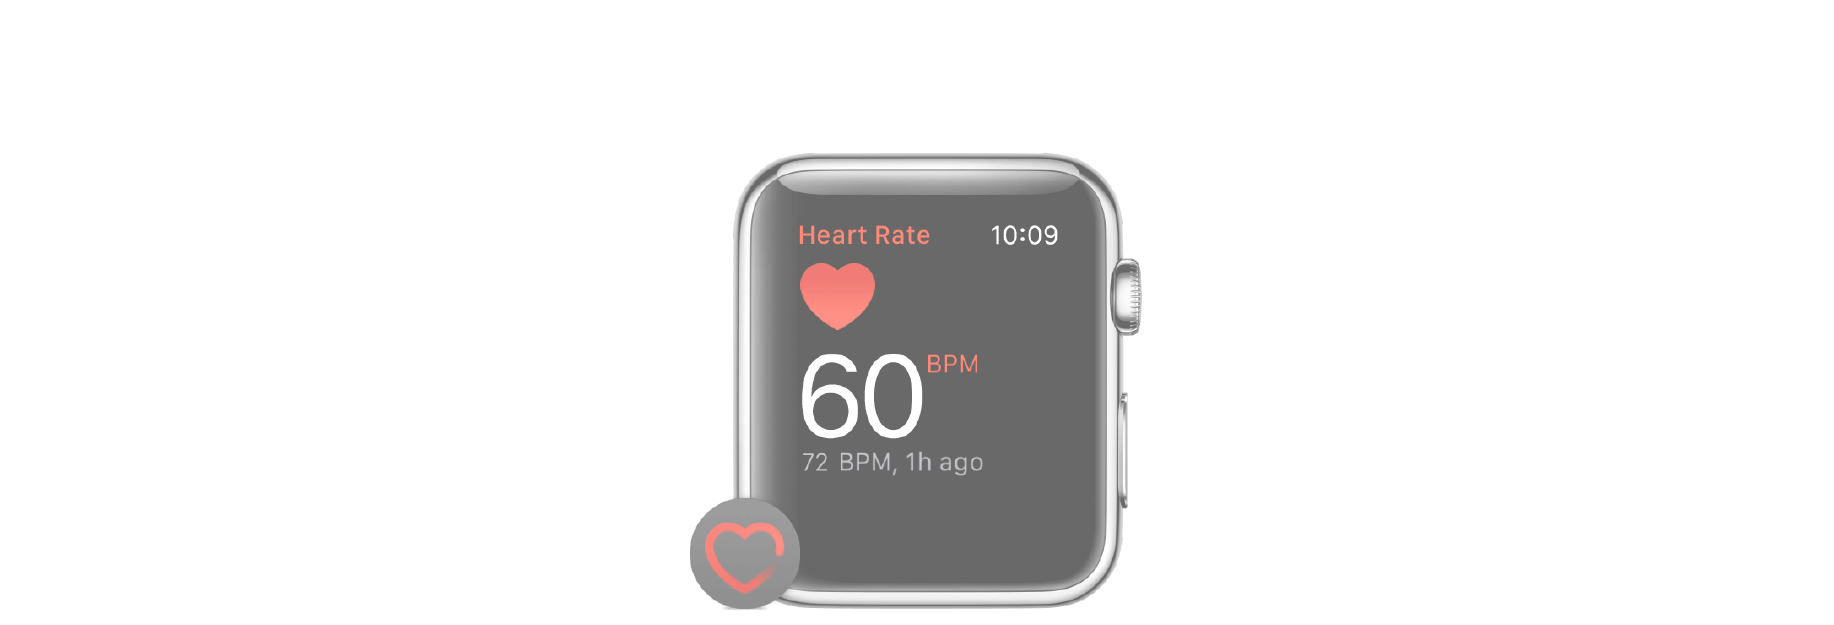 How to check your heart rate with Apple Watch